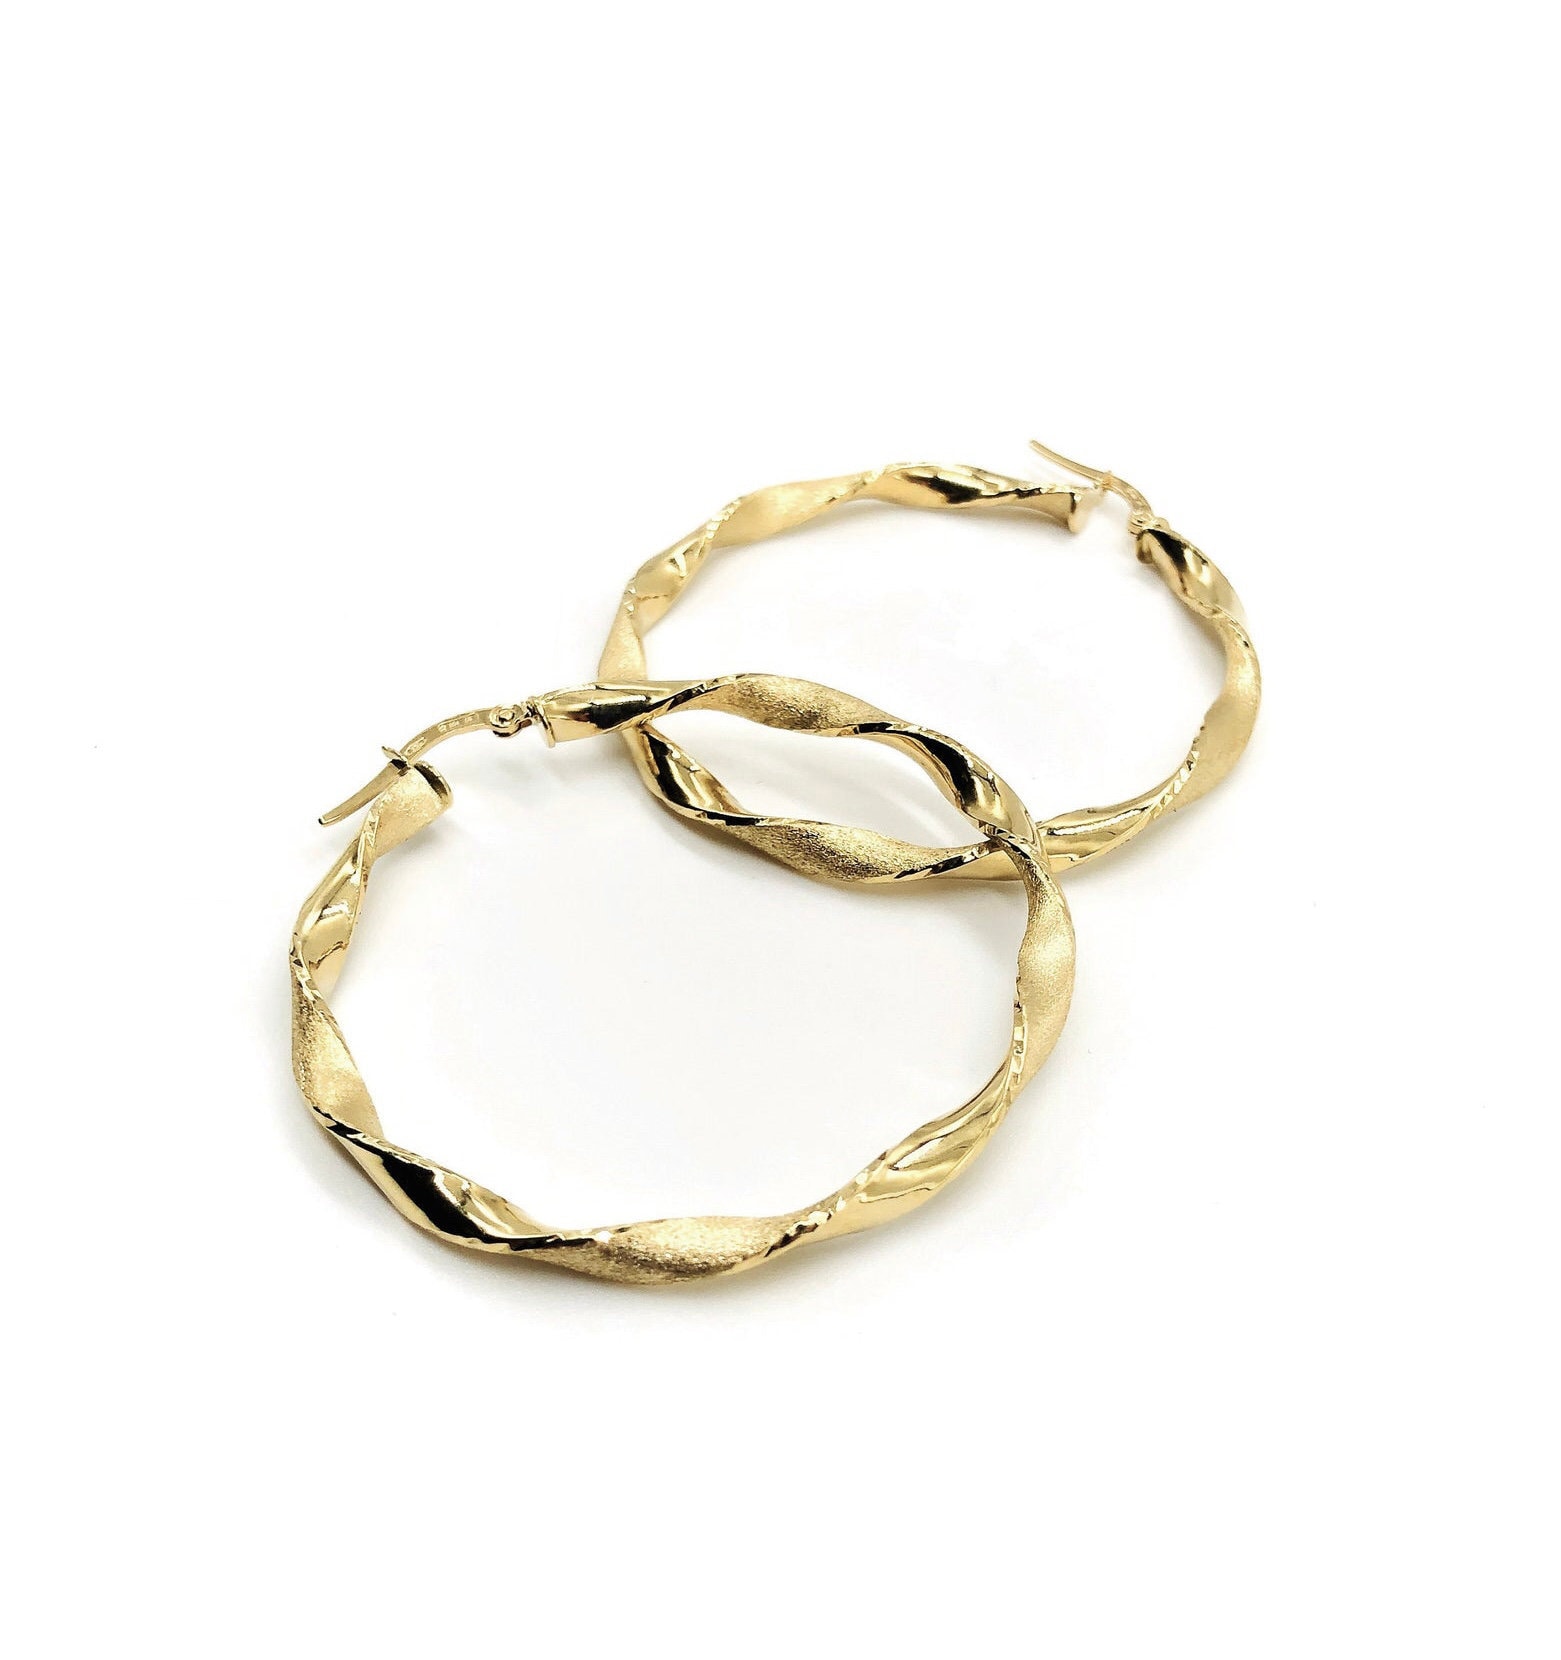 18K Yellow Gold Dainty Twisted Hoop Earrings Hoops Minimalist Classic Thin Gift For Her Made in Italy